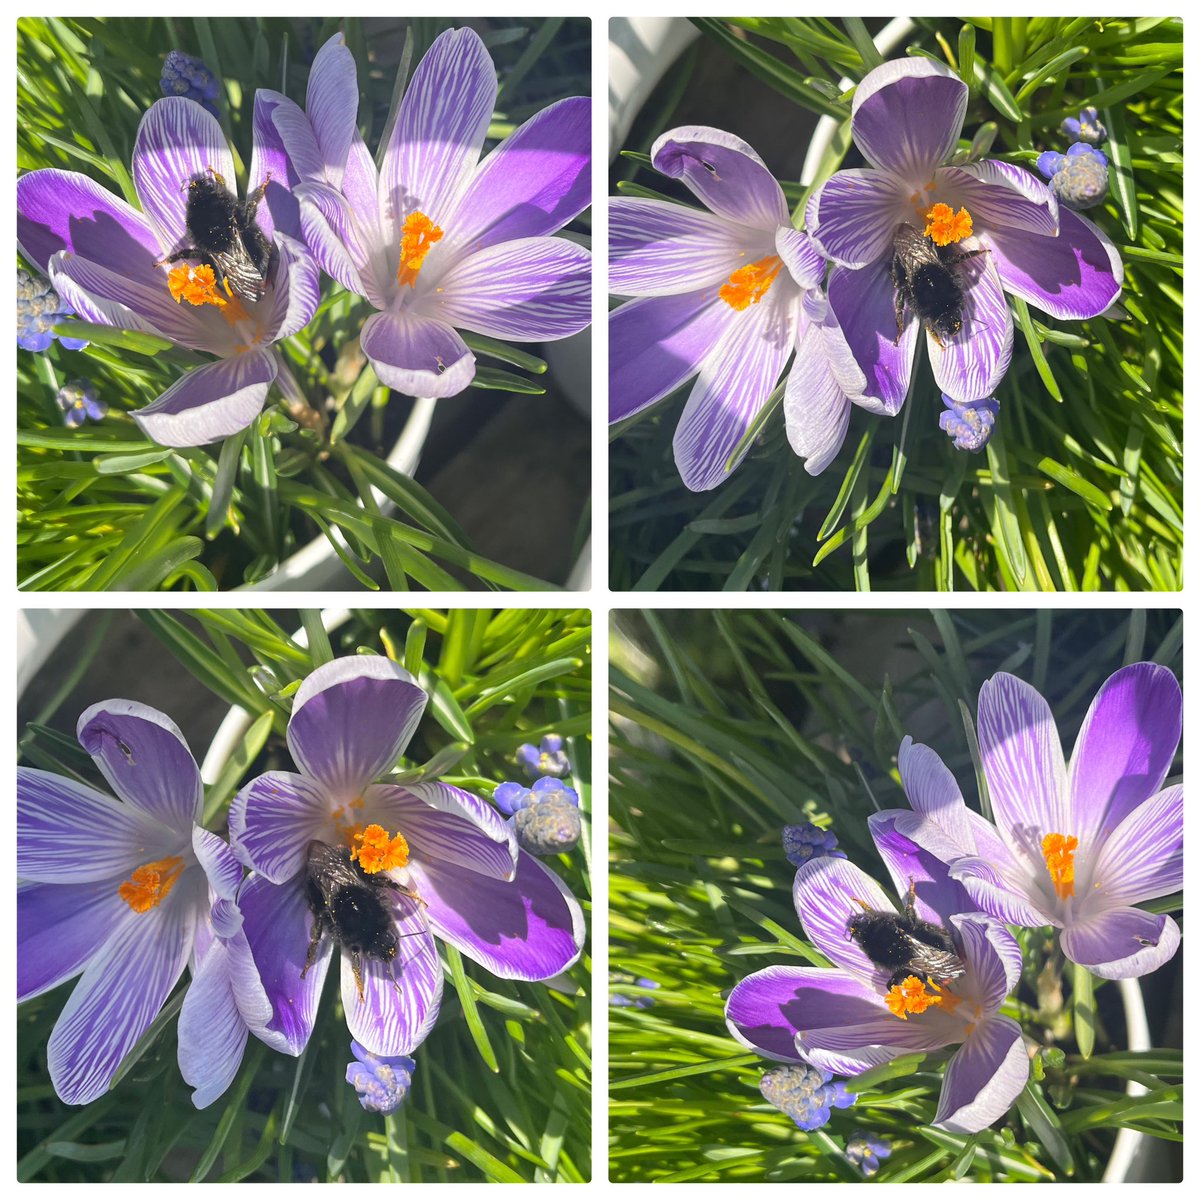 #ManchesterBees First bumble bee of the year on the balcony!! 🌿💜🐝🥳 🌿💜🐝🥳🌿#gardening #flowers #flowerreport #GardeningTwitter #balcony #ancoats #Manchester #springbulbs #spring #crocus #savethebees #bumblebee